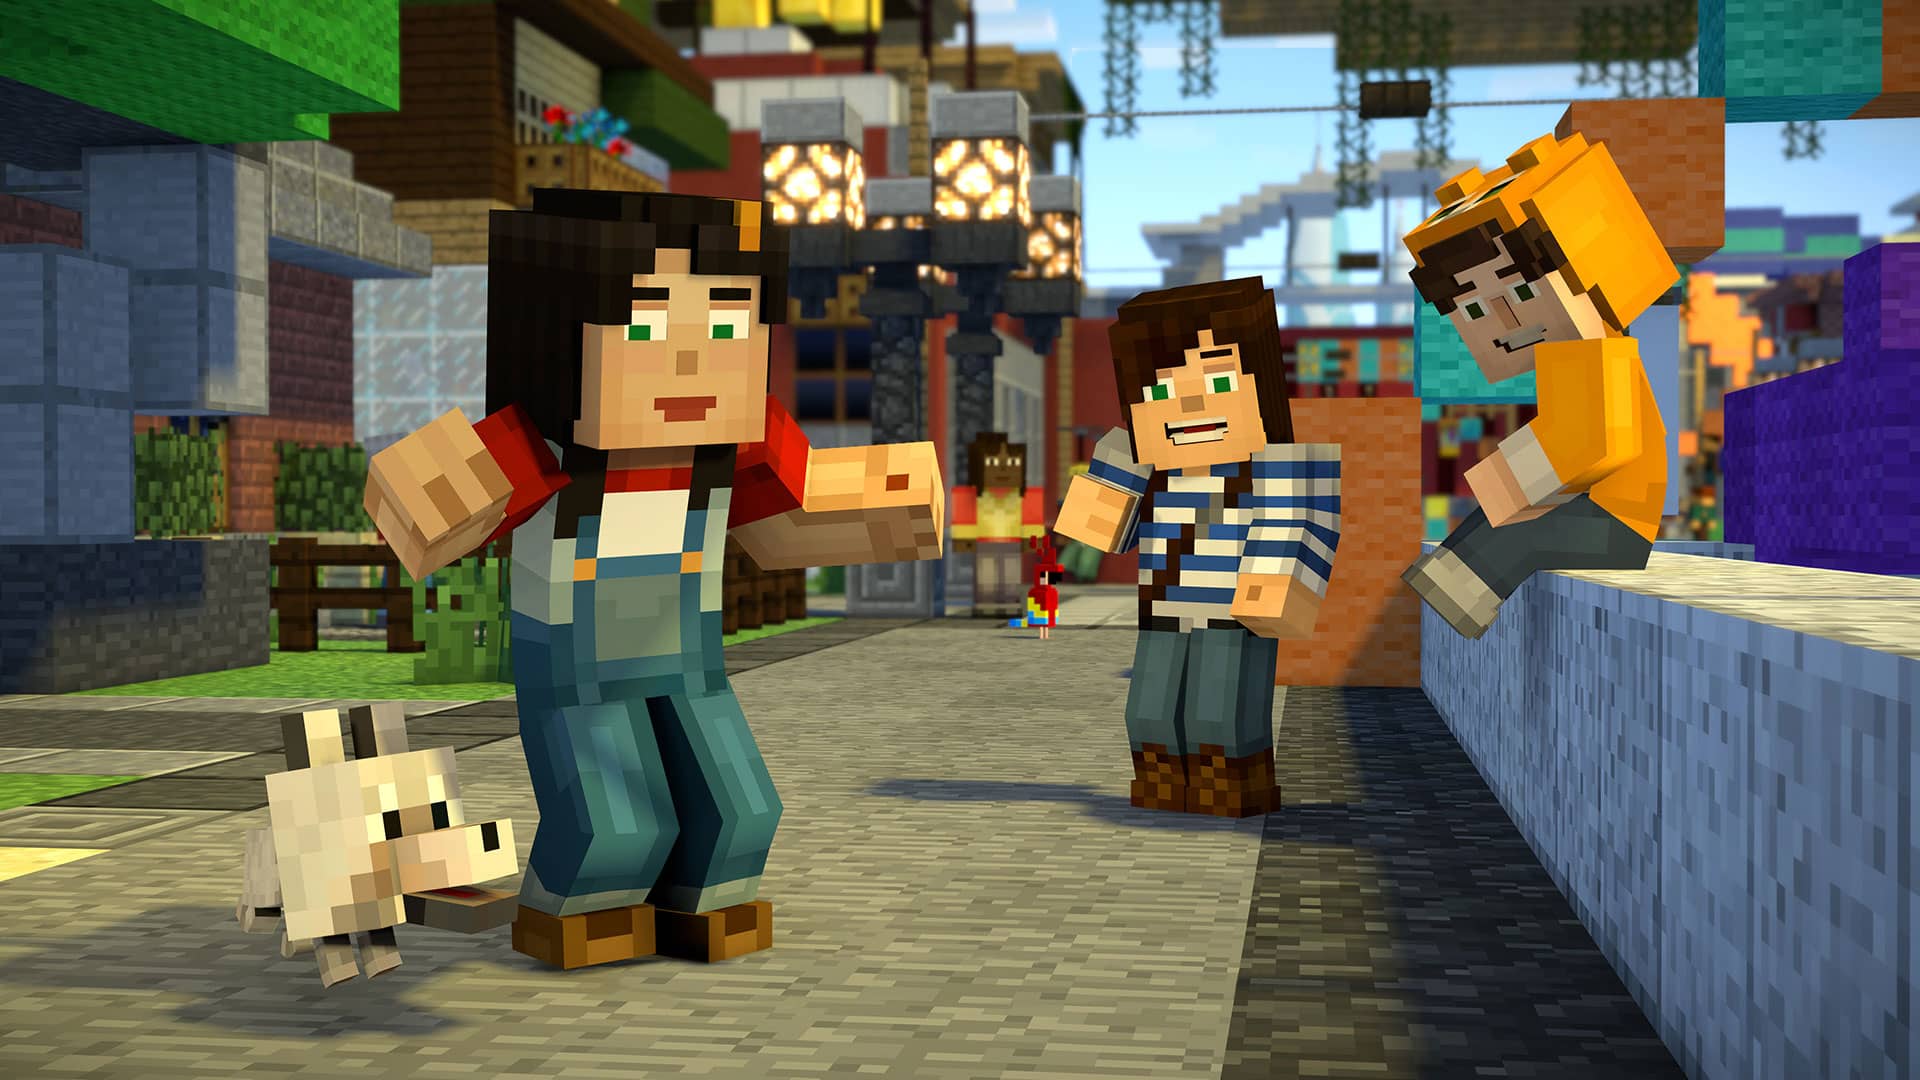 Minecraft: Story Mode Looks Charming